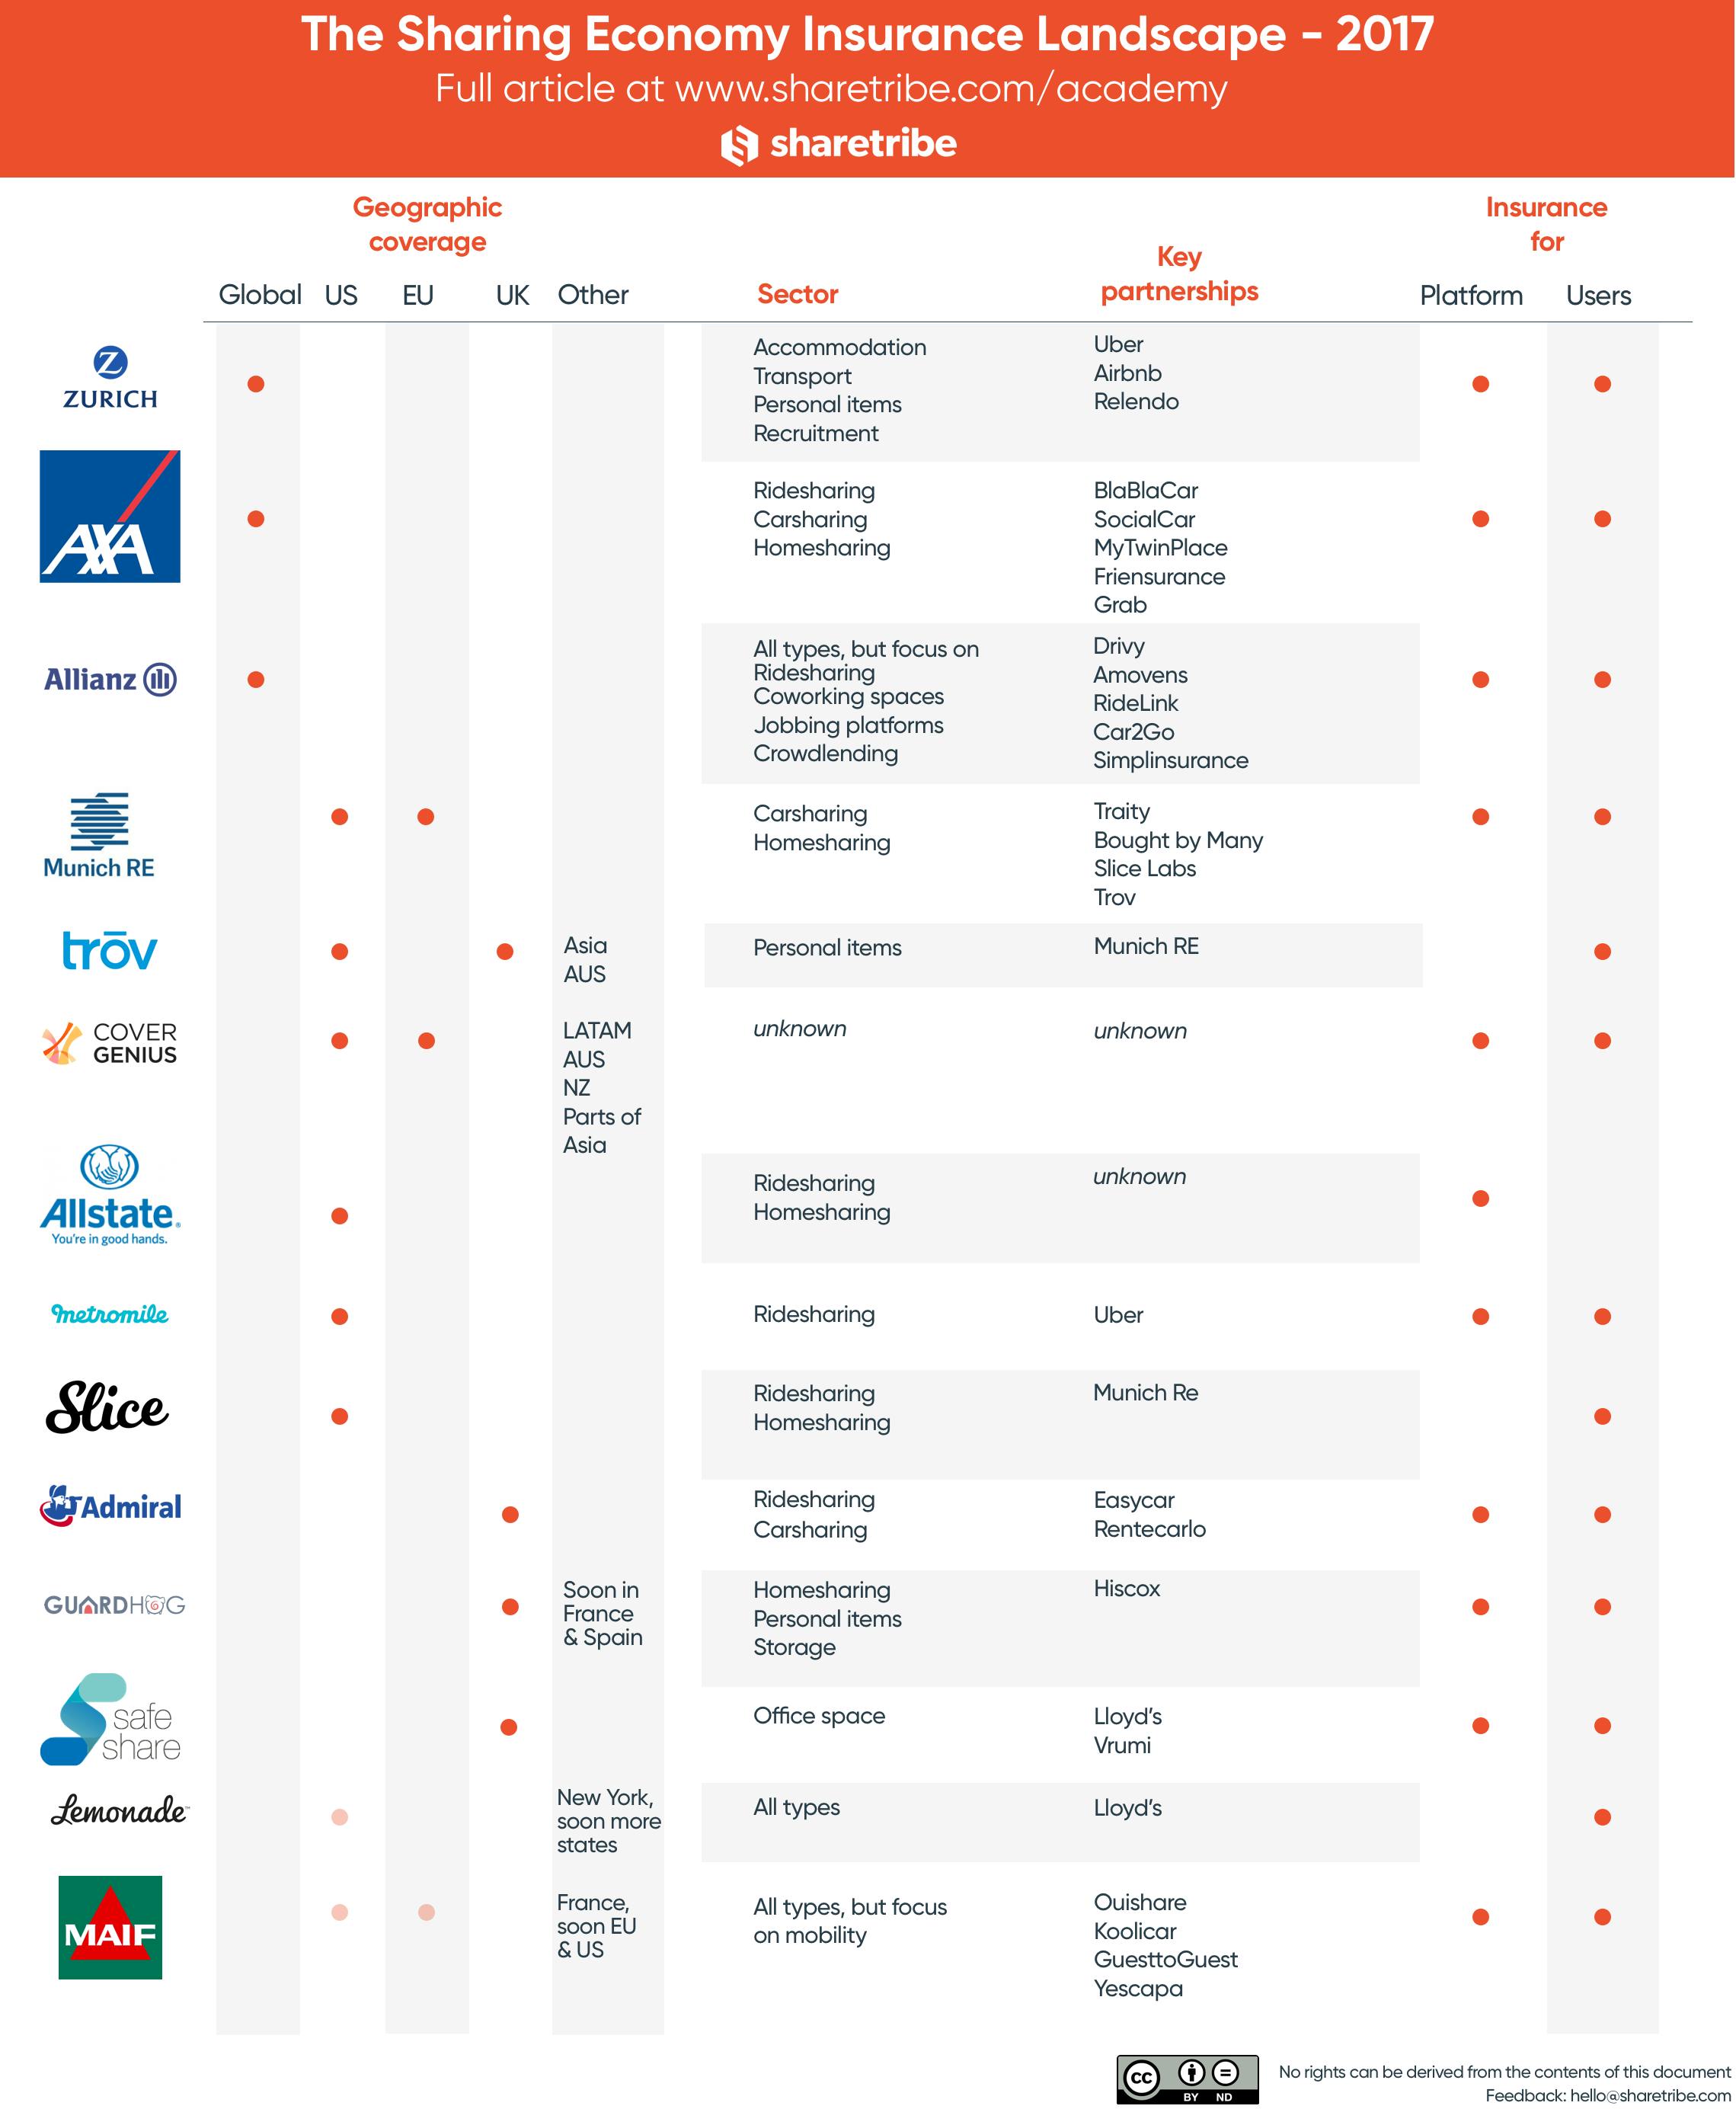 The Sharing Economy Insurance Landscape - Insurance for online marketplaces & peer-to-peer marketplaces